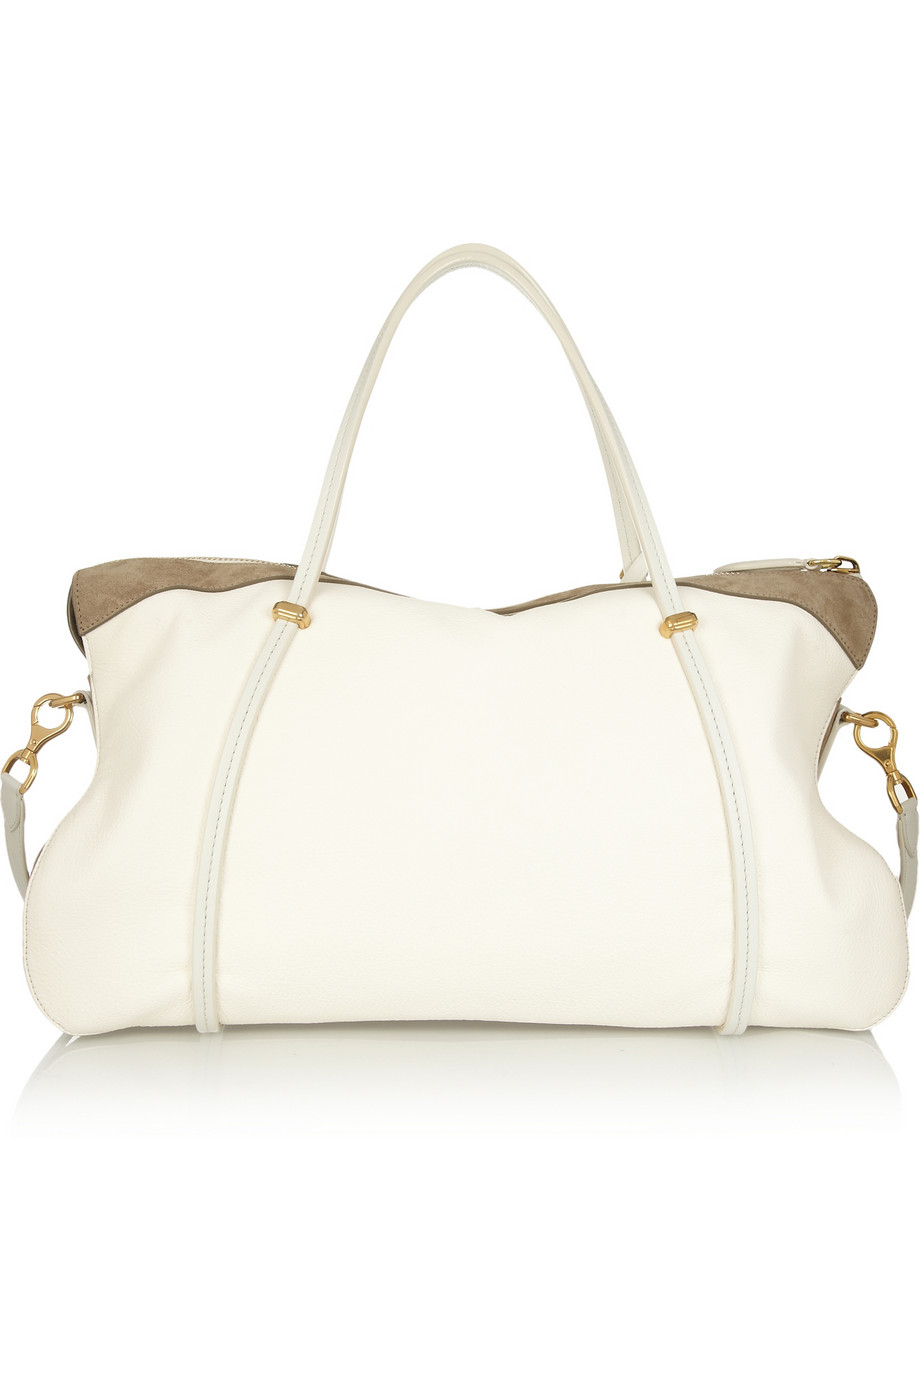 Lyst - Nina Ricci Ballet Leather And Suede Shoulder Bag in White